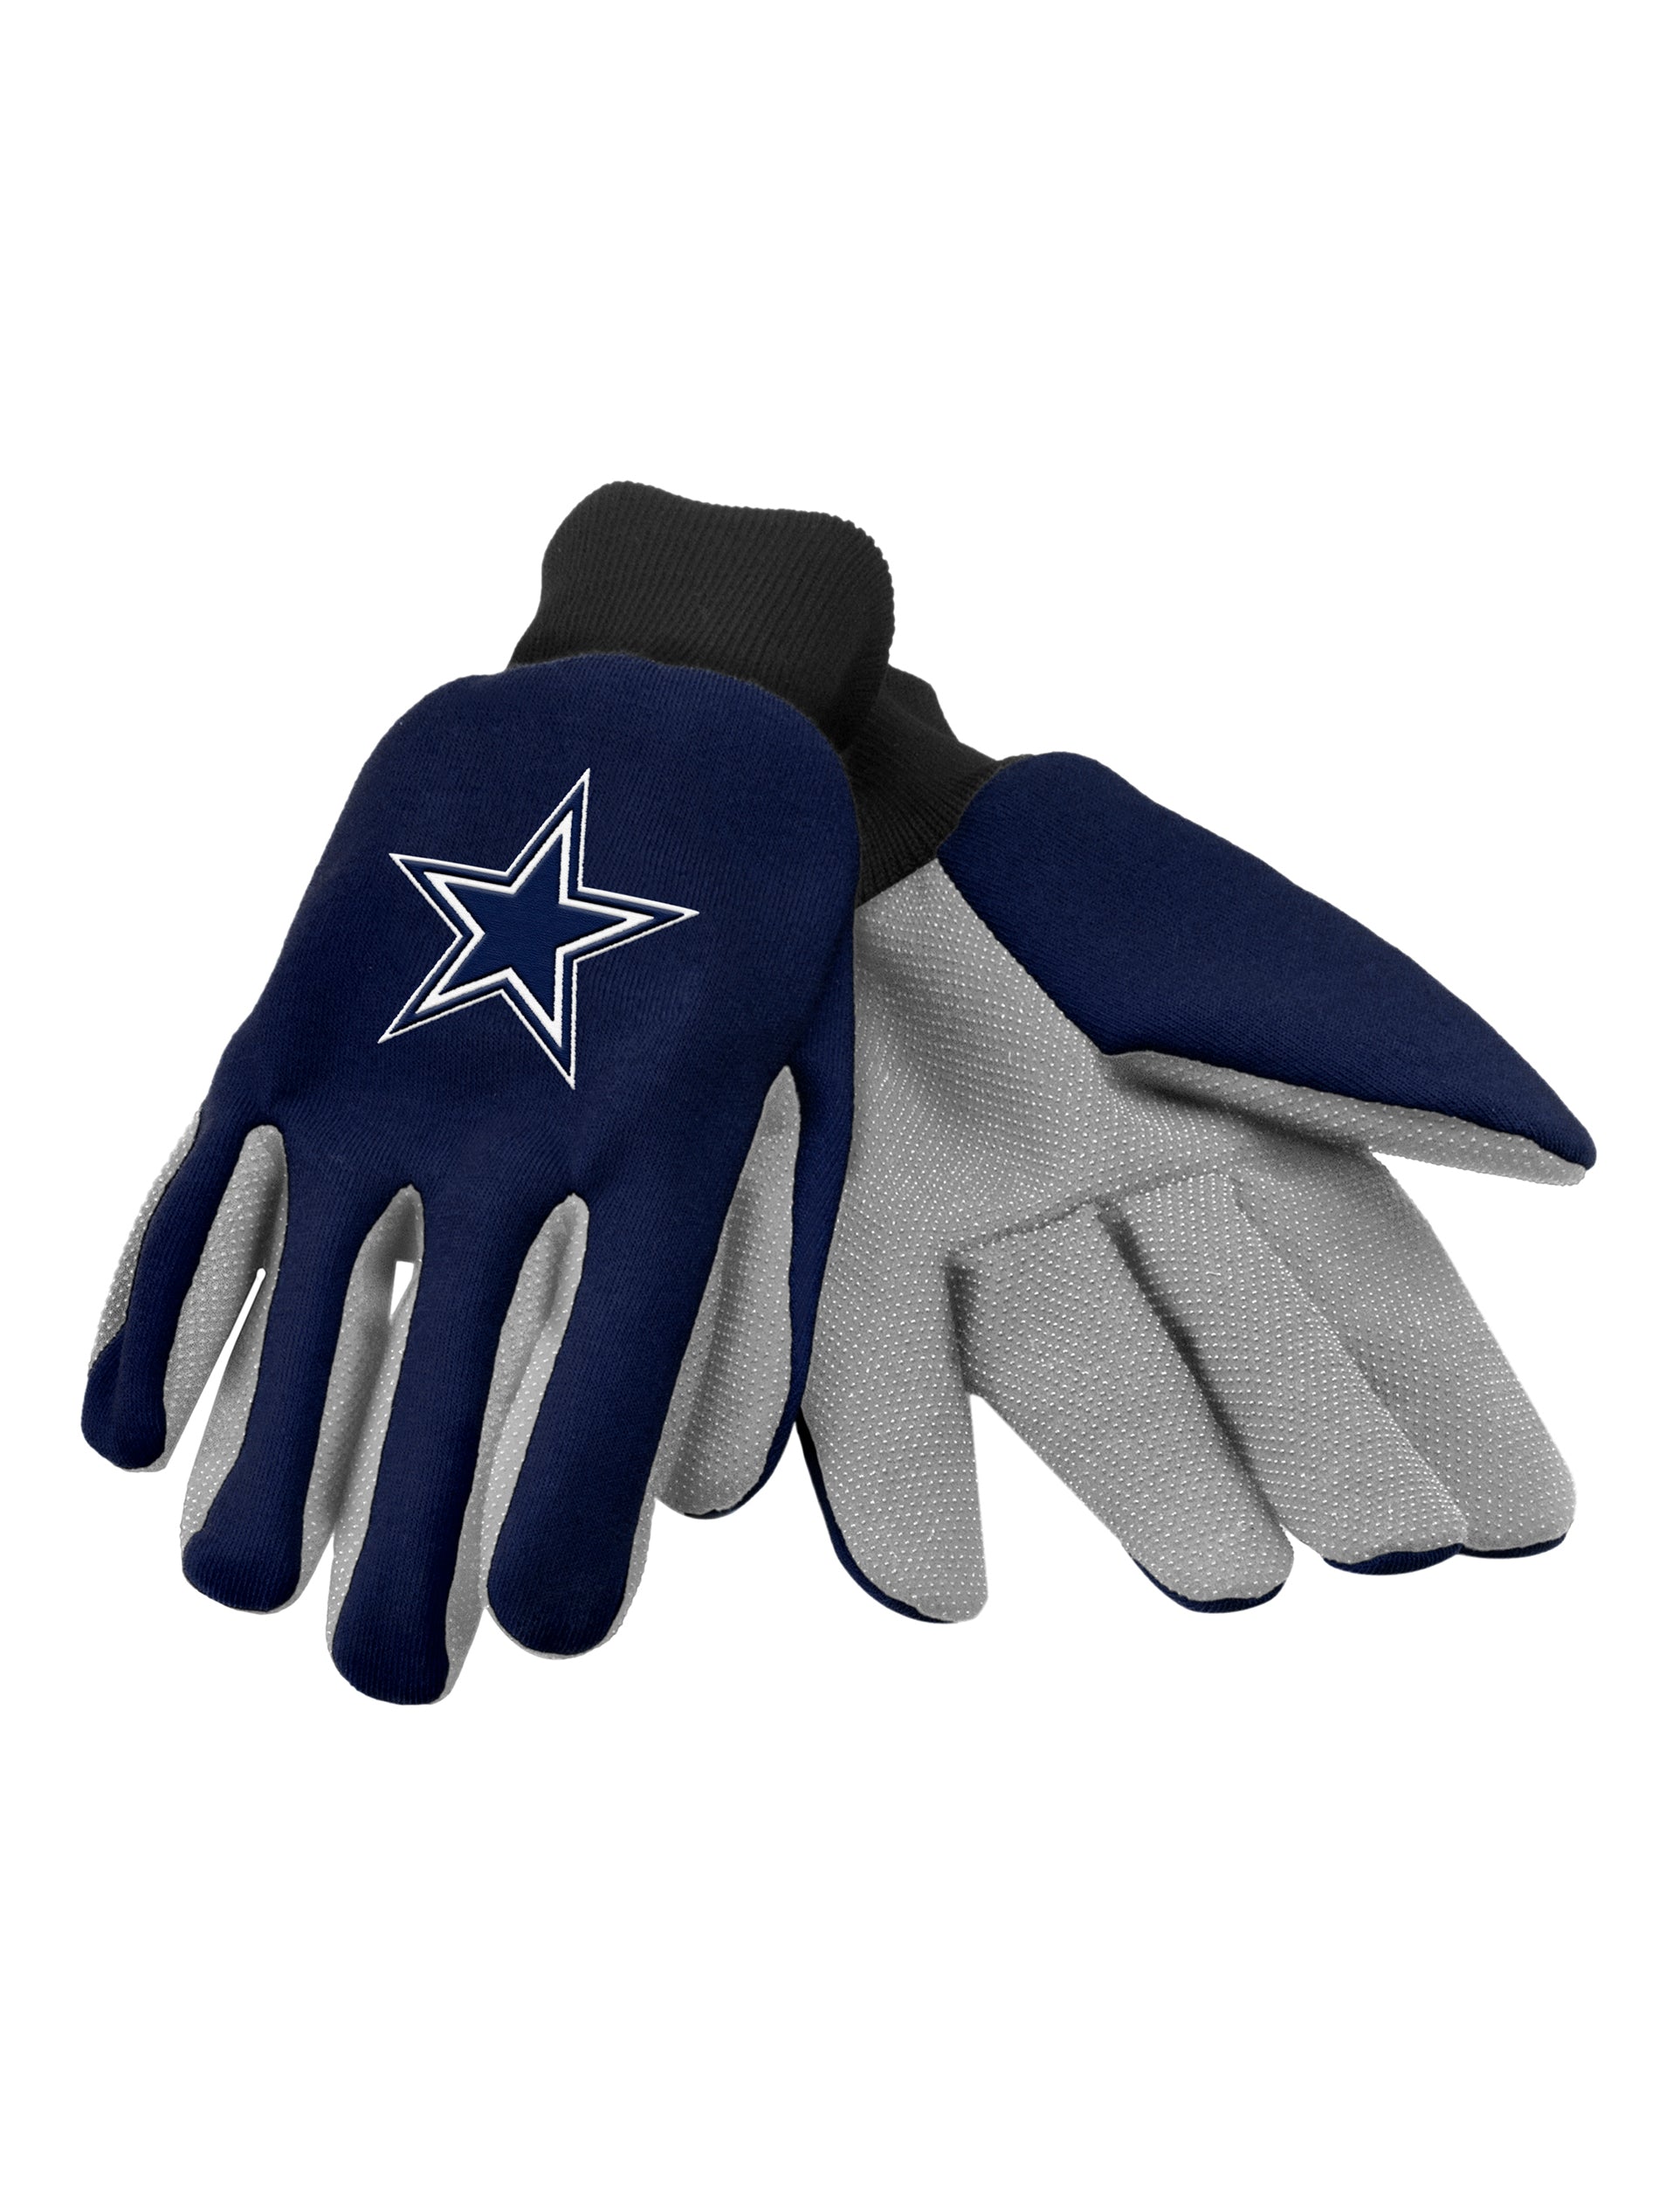 forever-collectibles-nfl-cowboys-utility-gloves